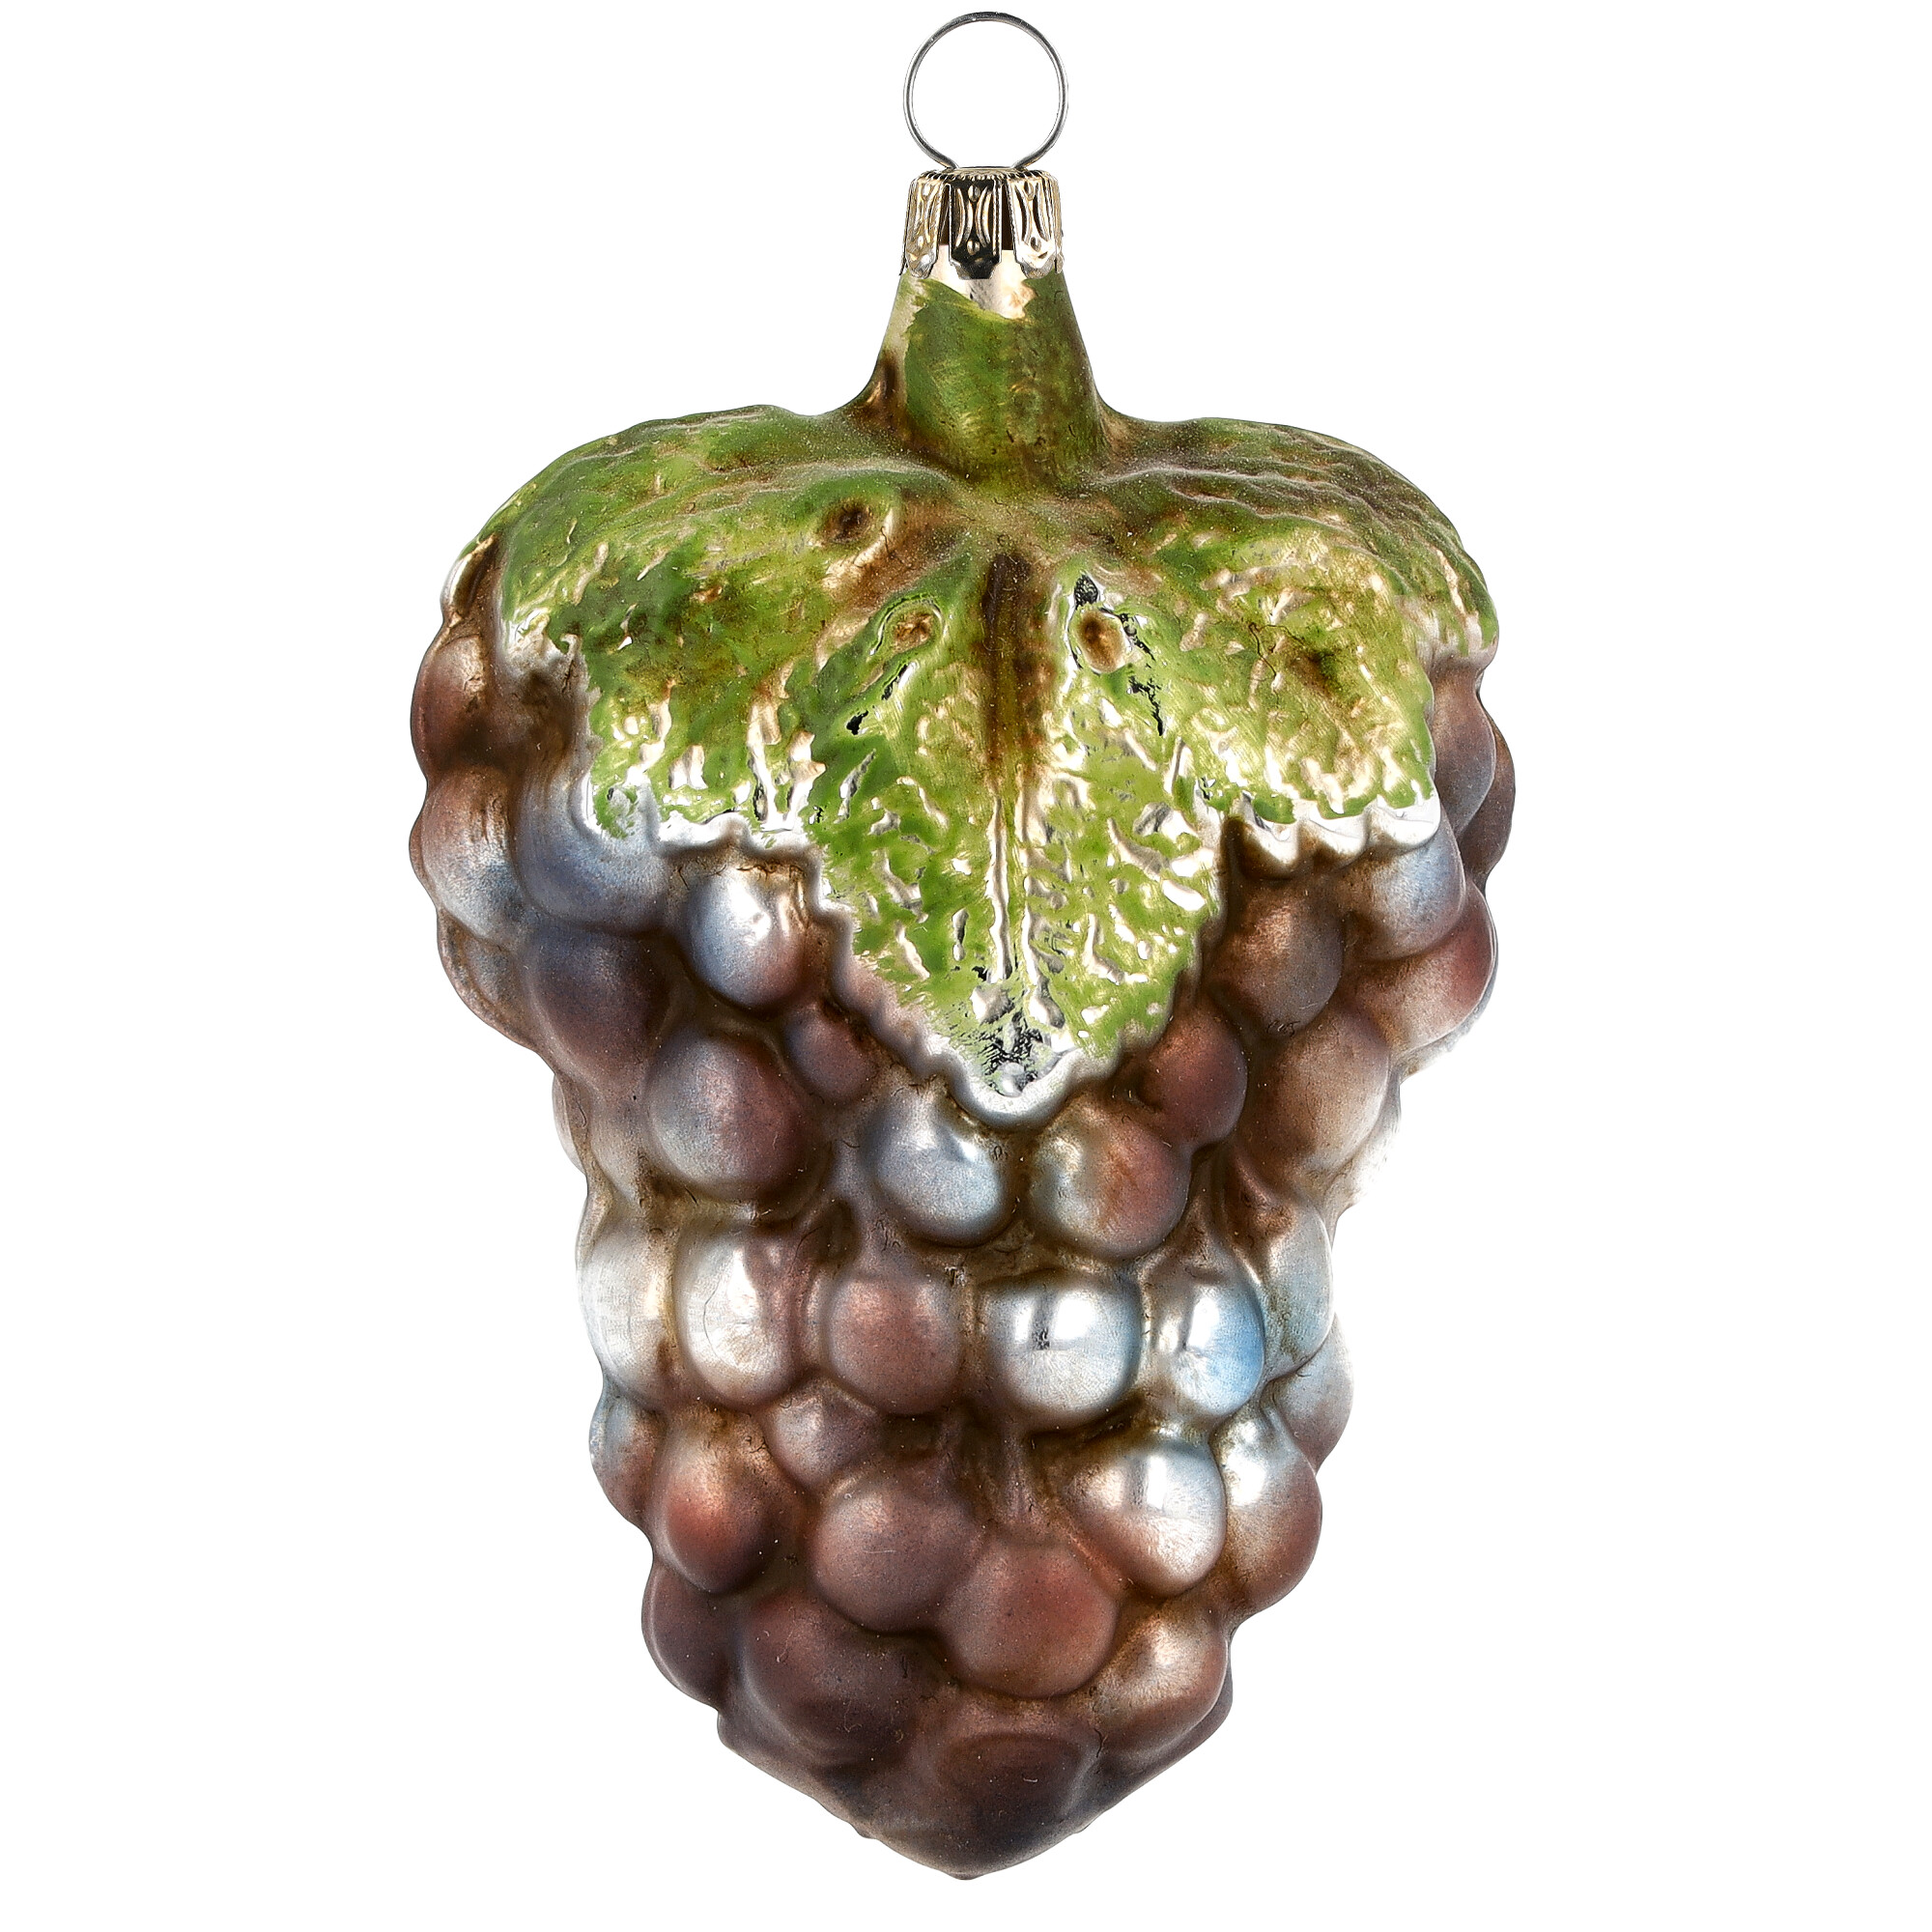 Retro Vintage style Christmas Glass Ornament - Large grapes with leaf